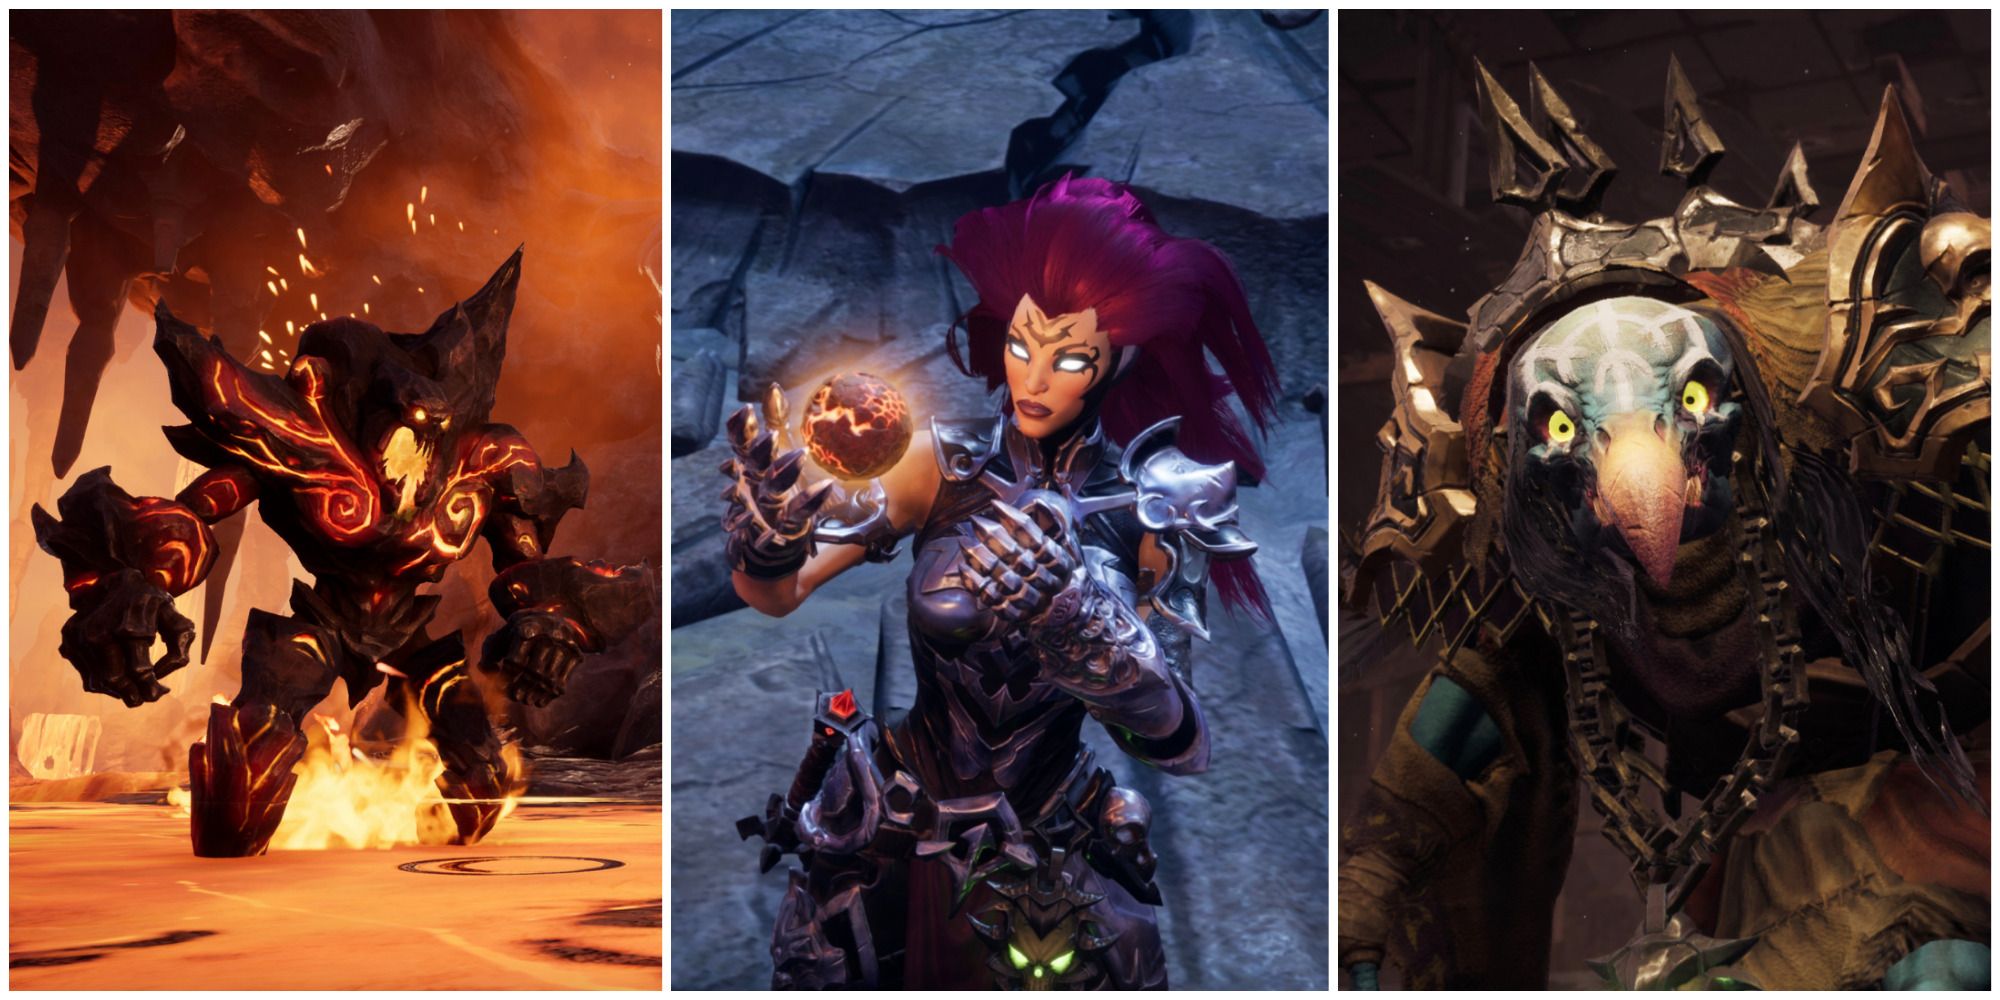 Darksiders 3: Every Boss Ranked